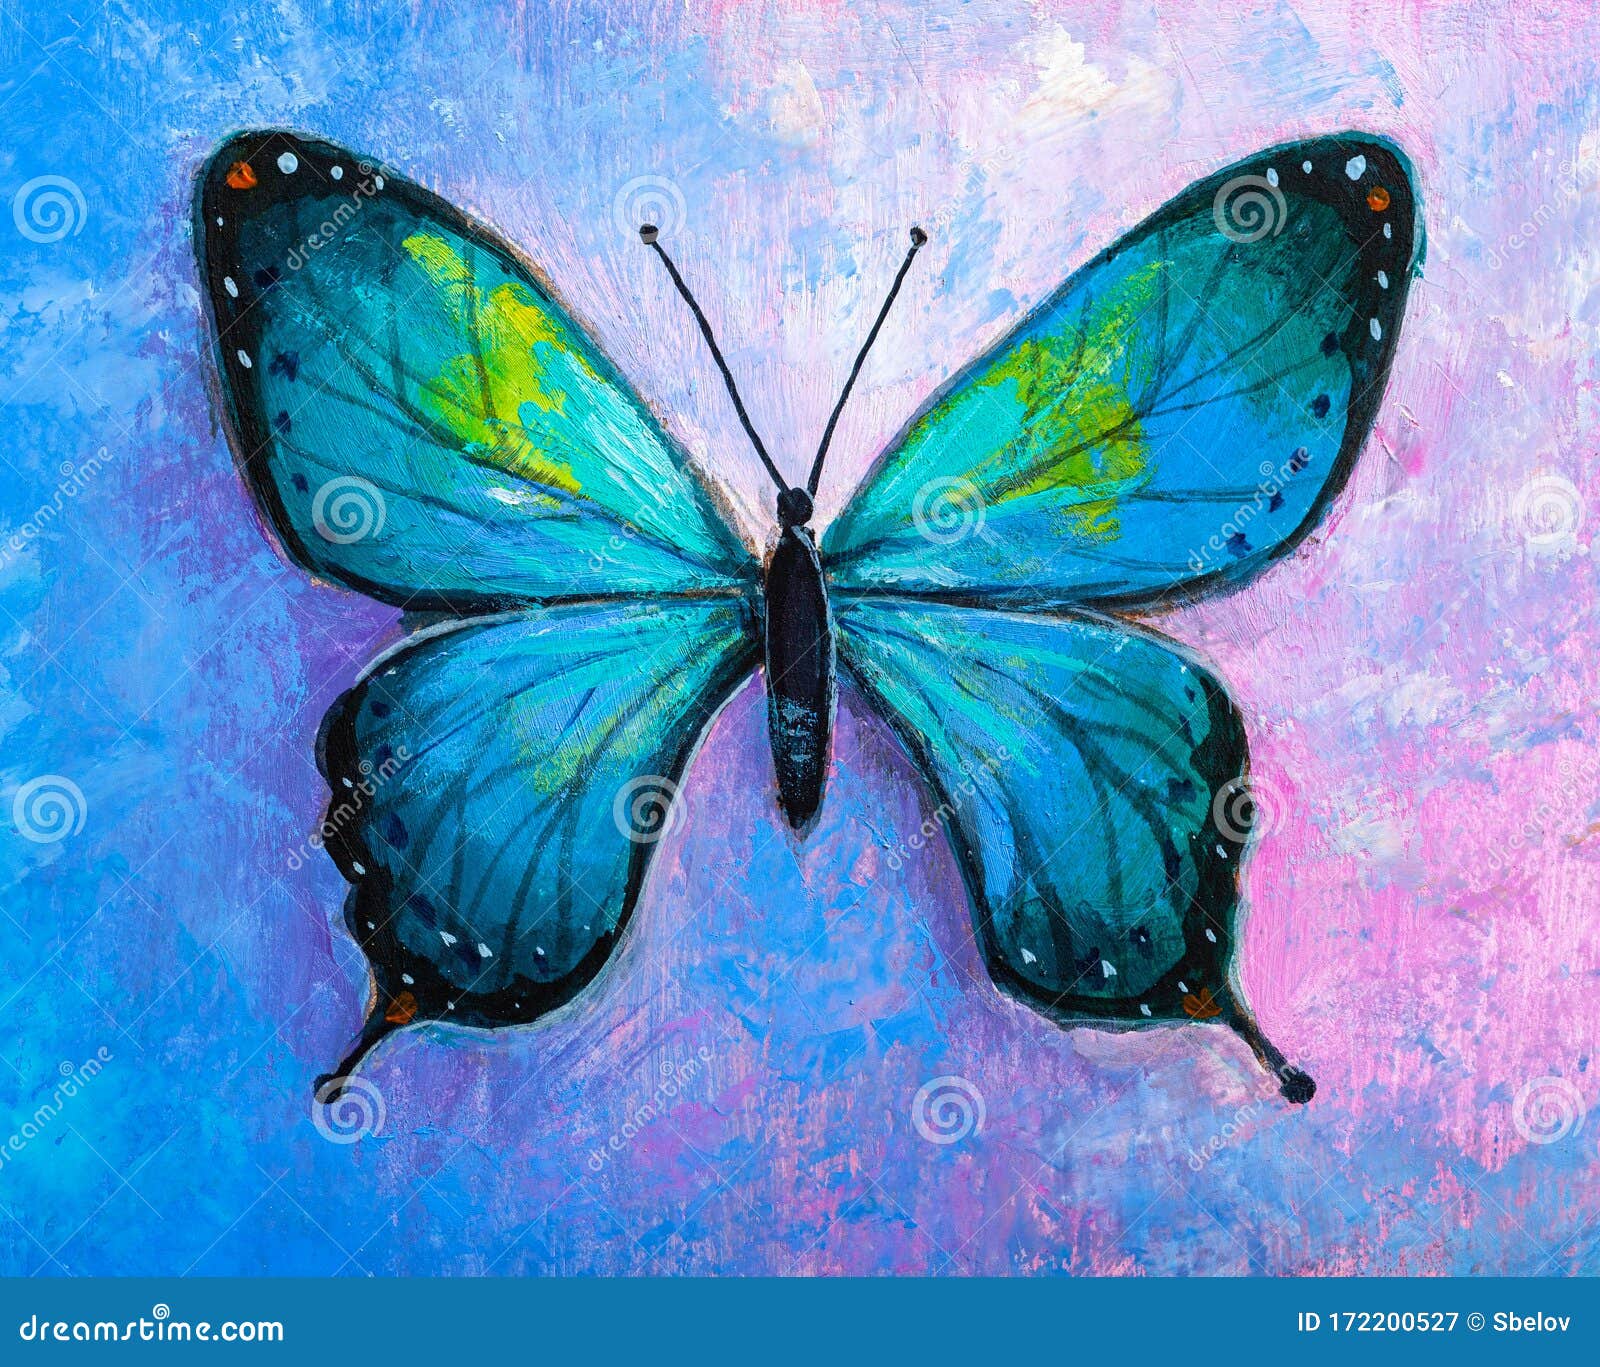 5D Diamond Painting Glowing Purple and Blue Butterfly Kit